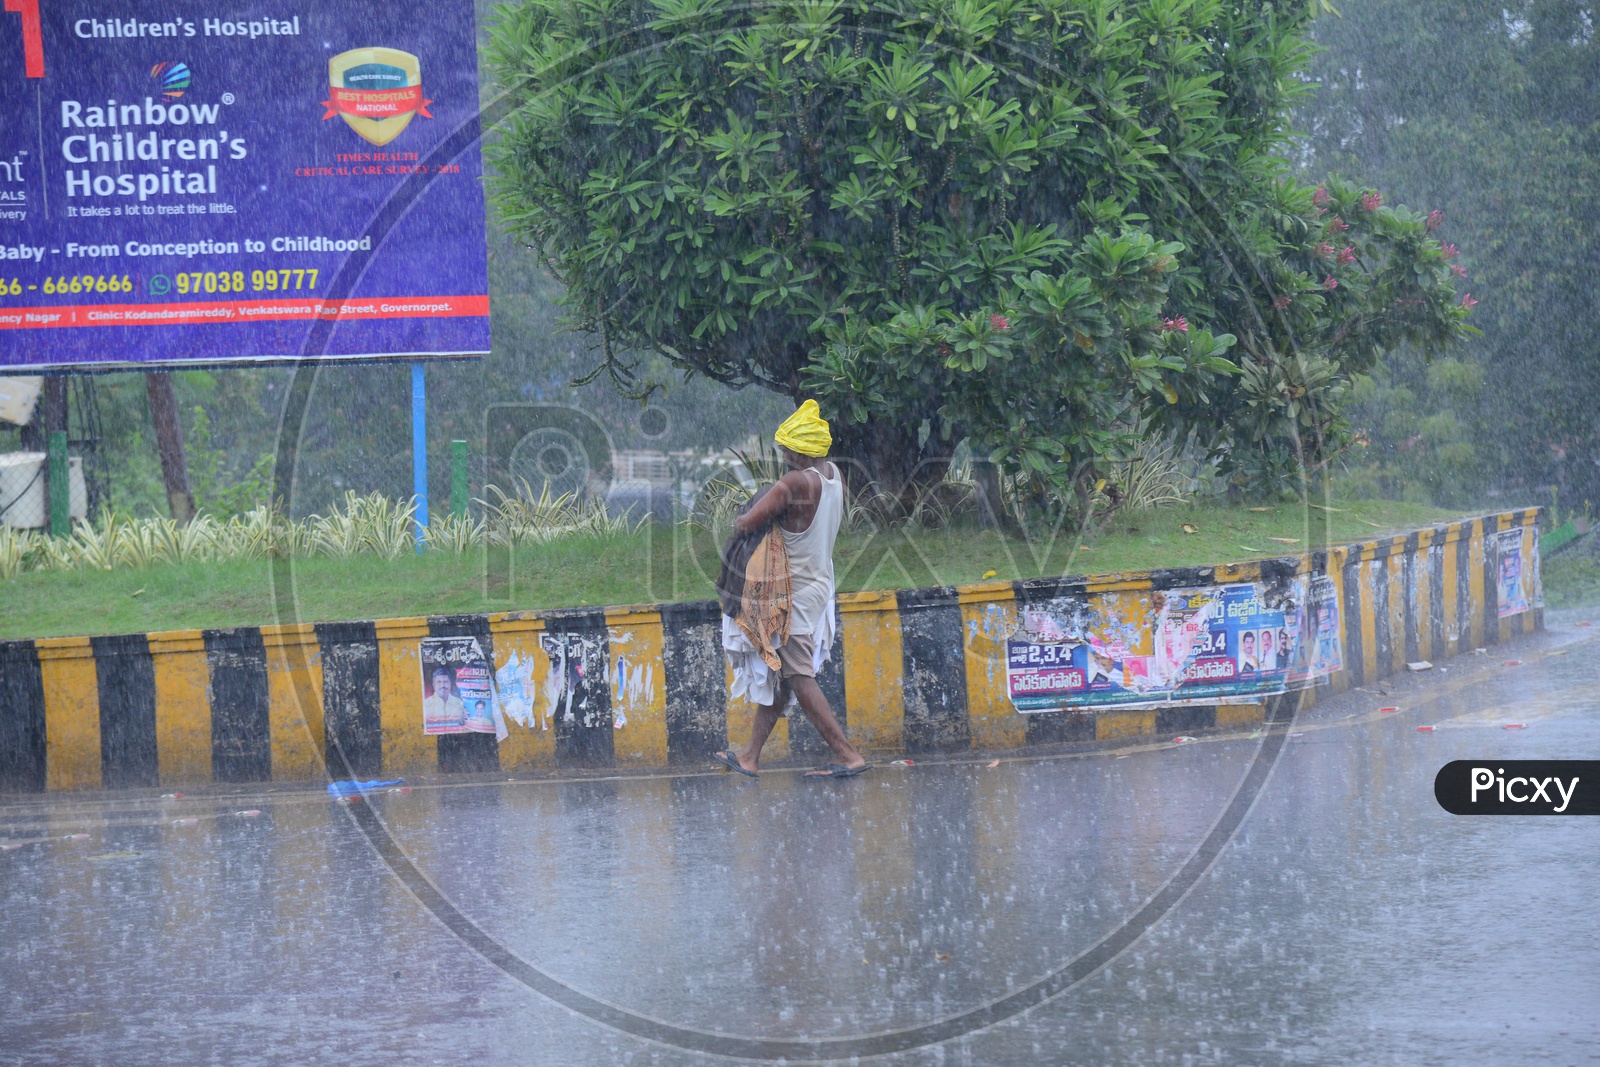 A man walking on the road while its raining